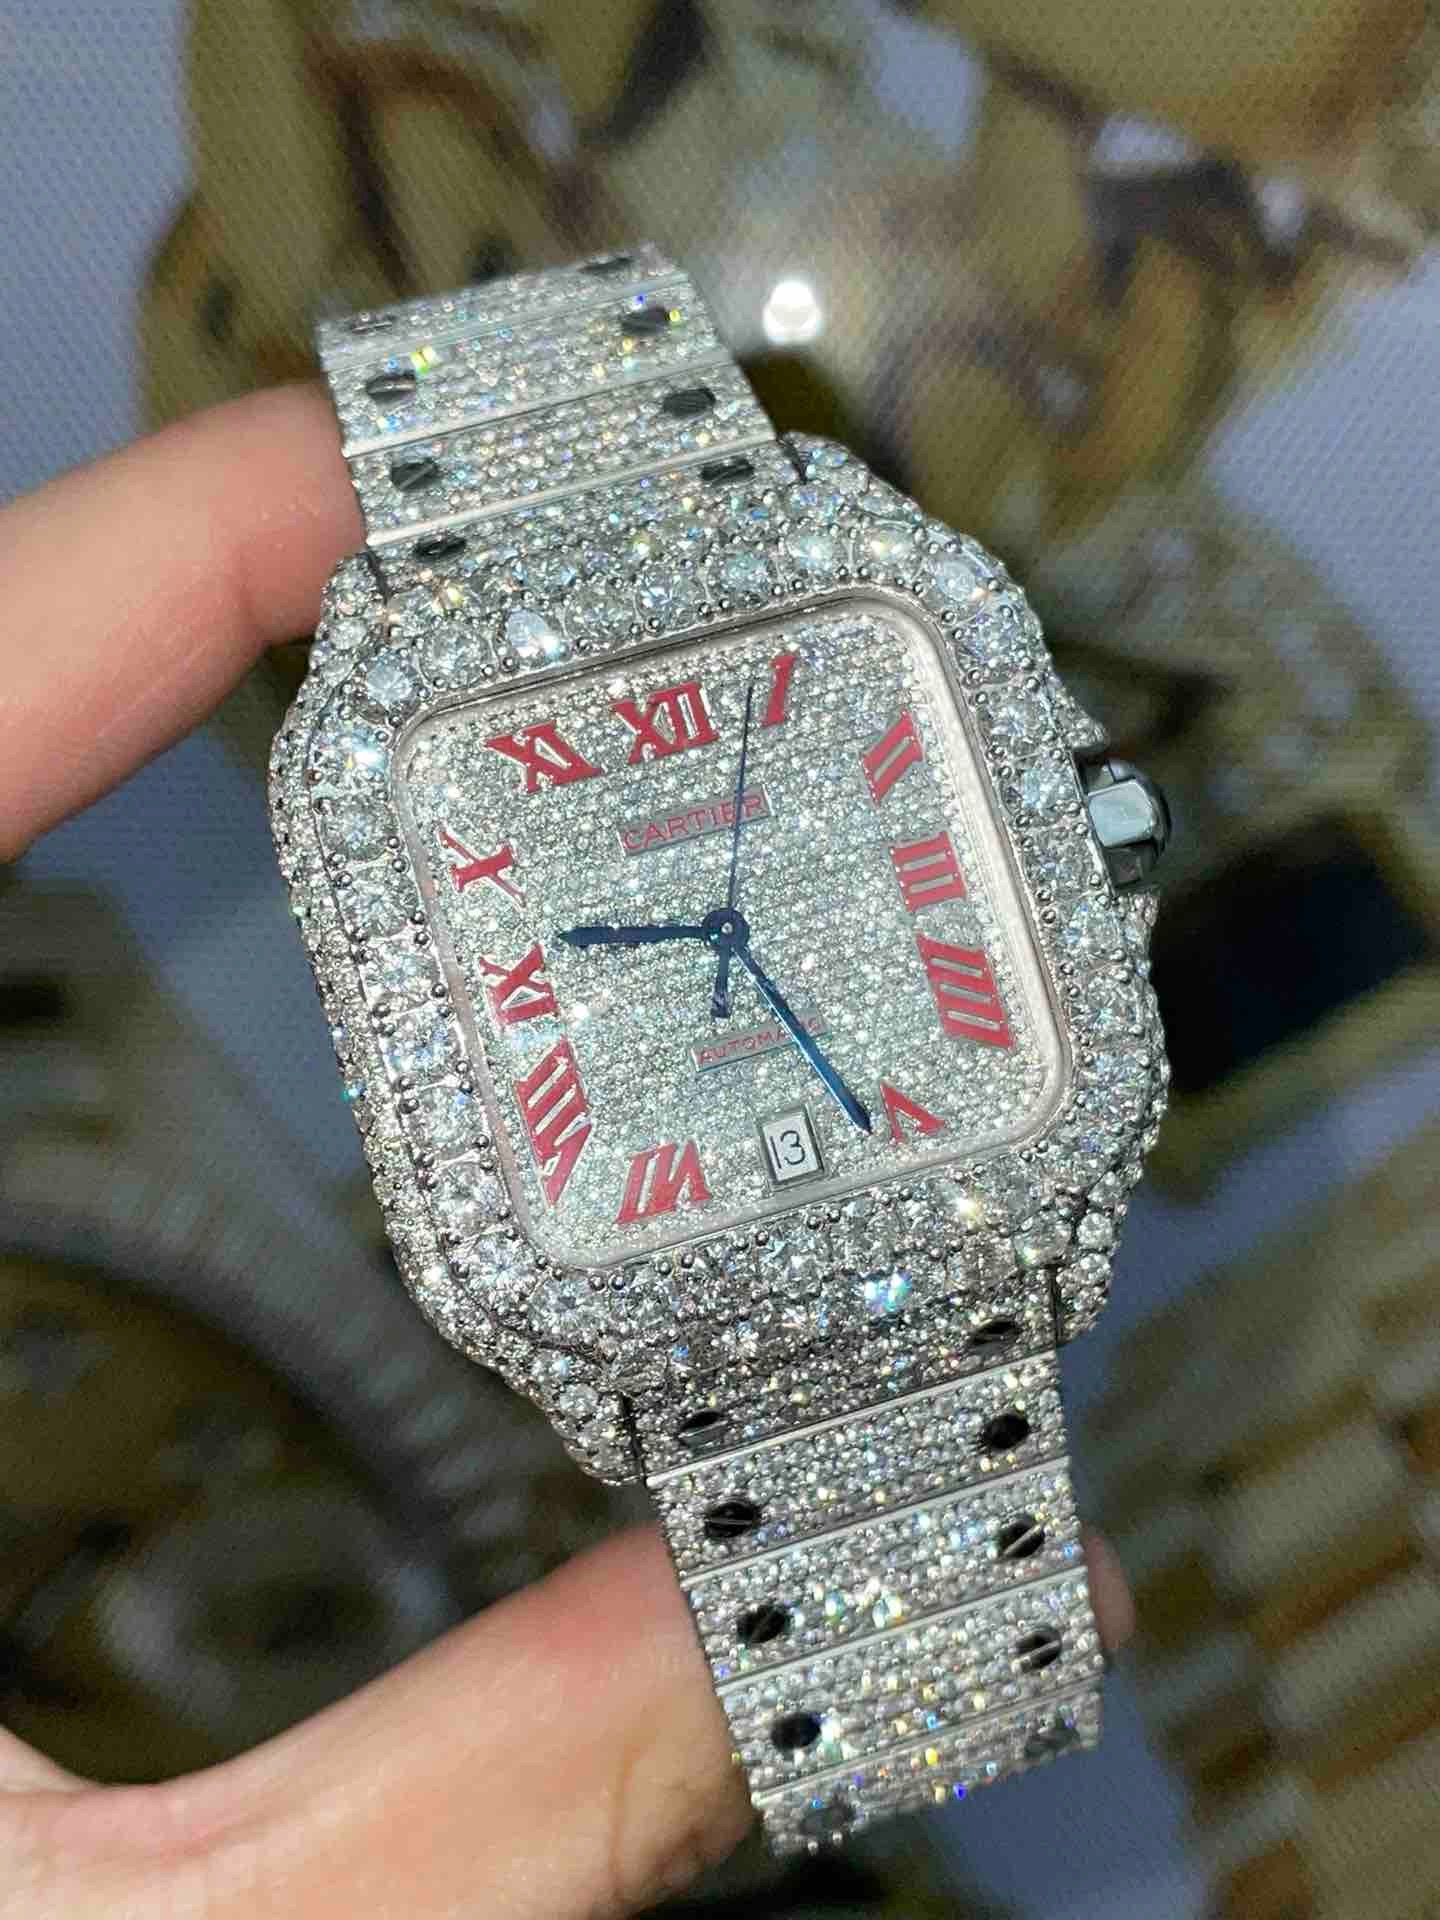 41mm Cartier Xl Vvs-1 "iced bust down" 25 cts "Avalanche" iced out watch